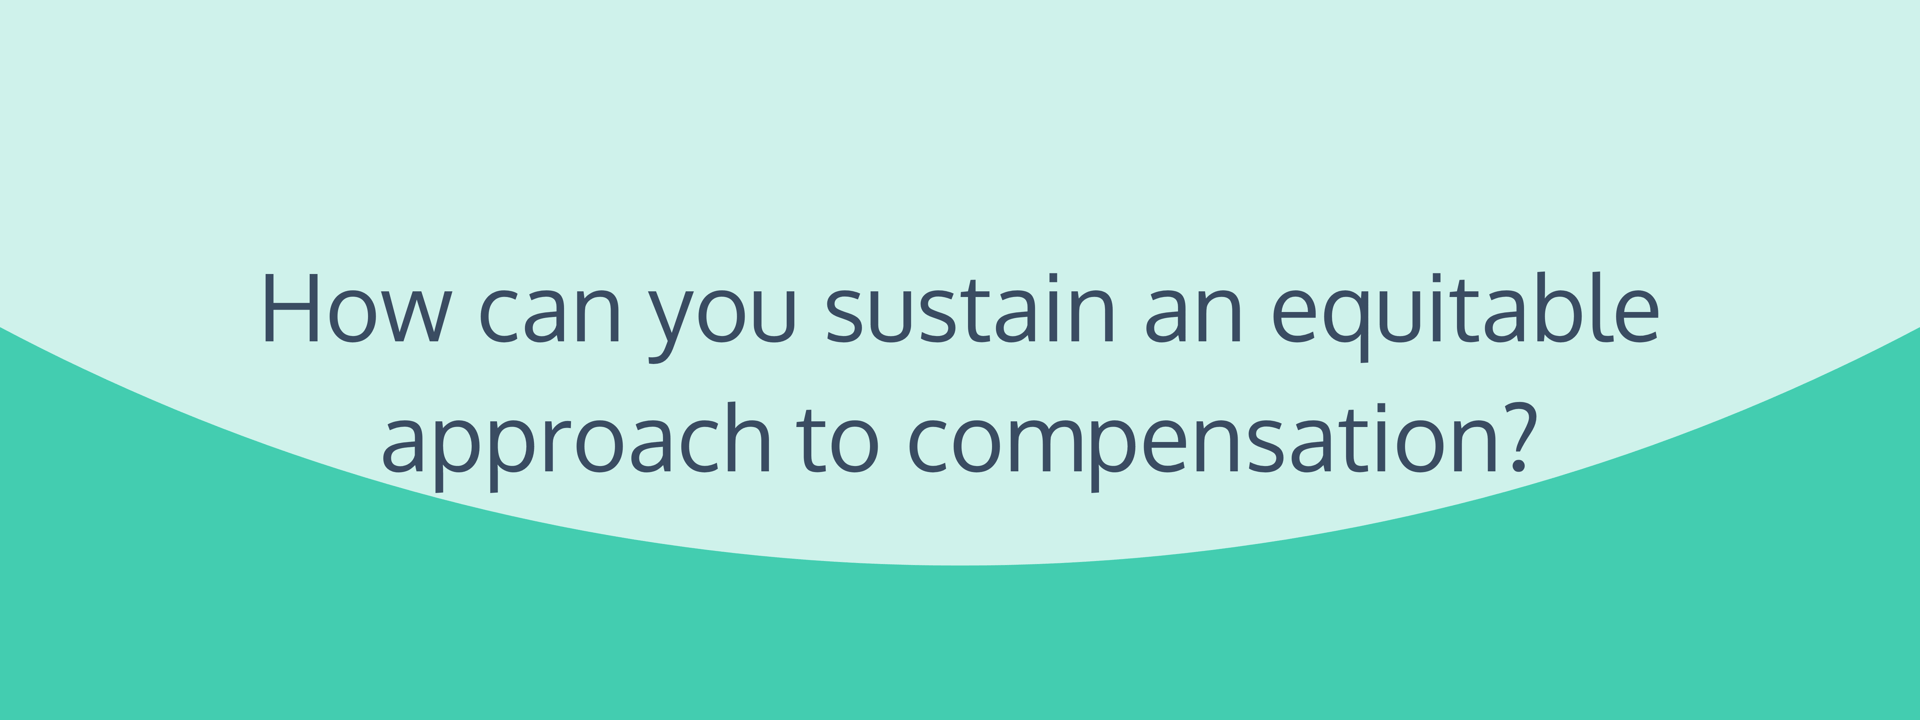 How do you sustain an equitable approach to compensation?